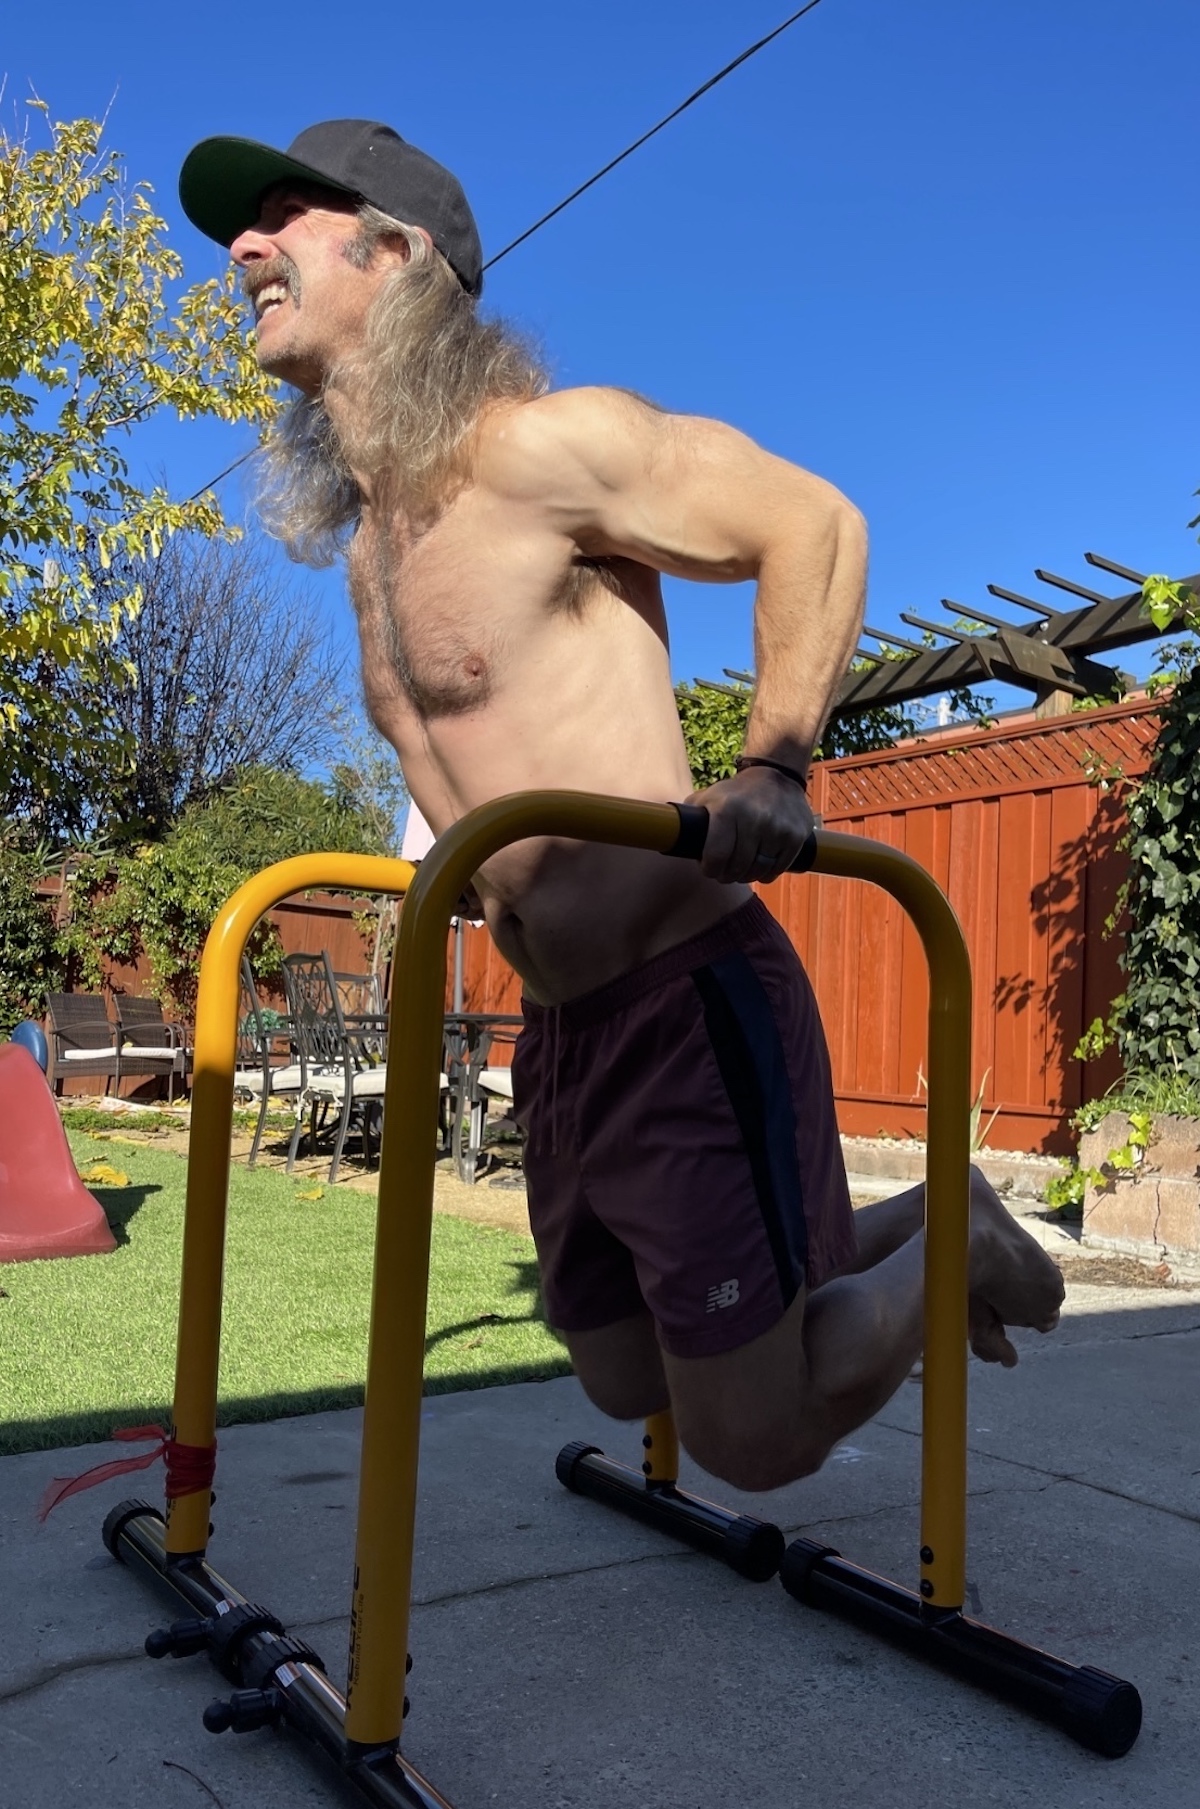 A man does bar dips on an outdoor play structure